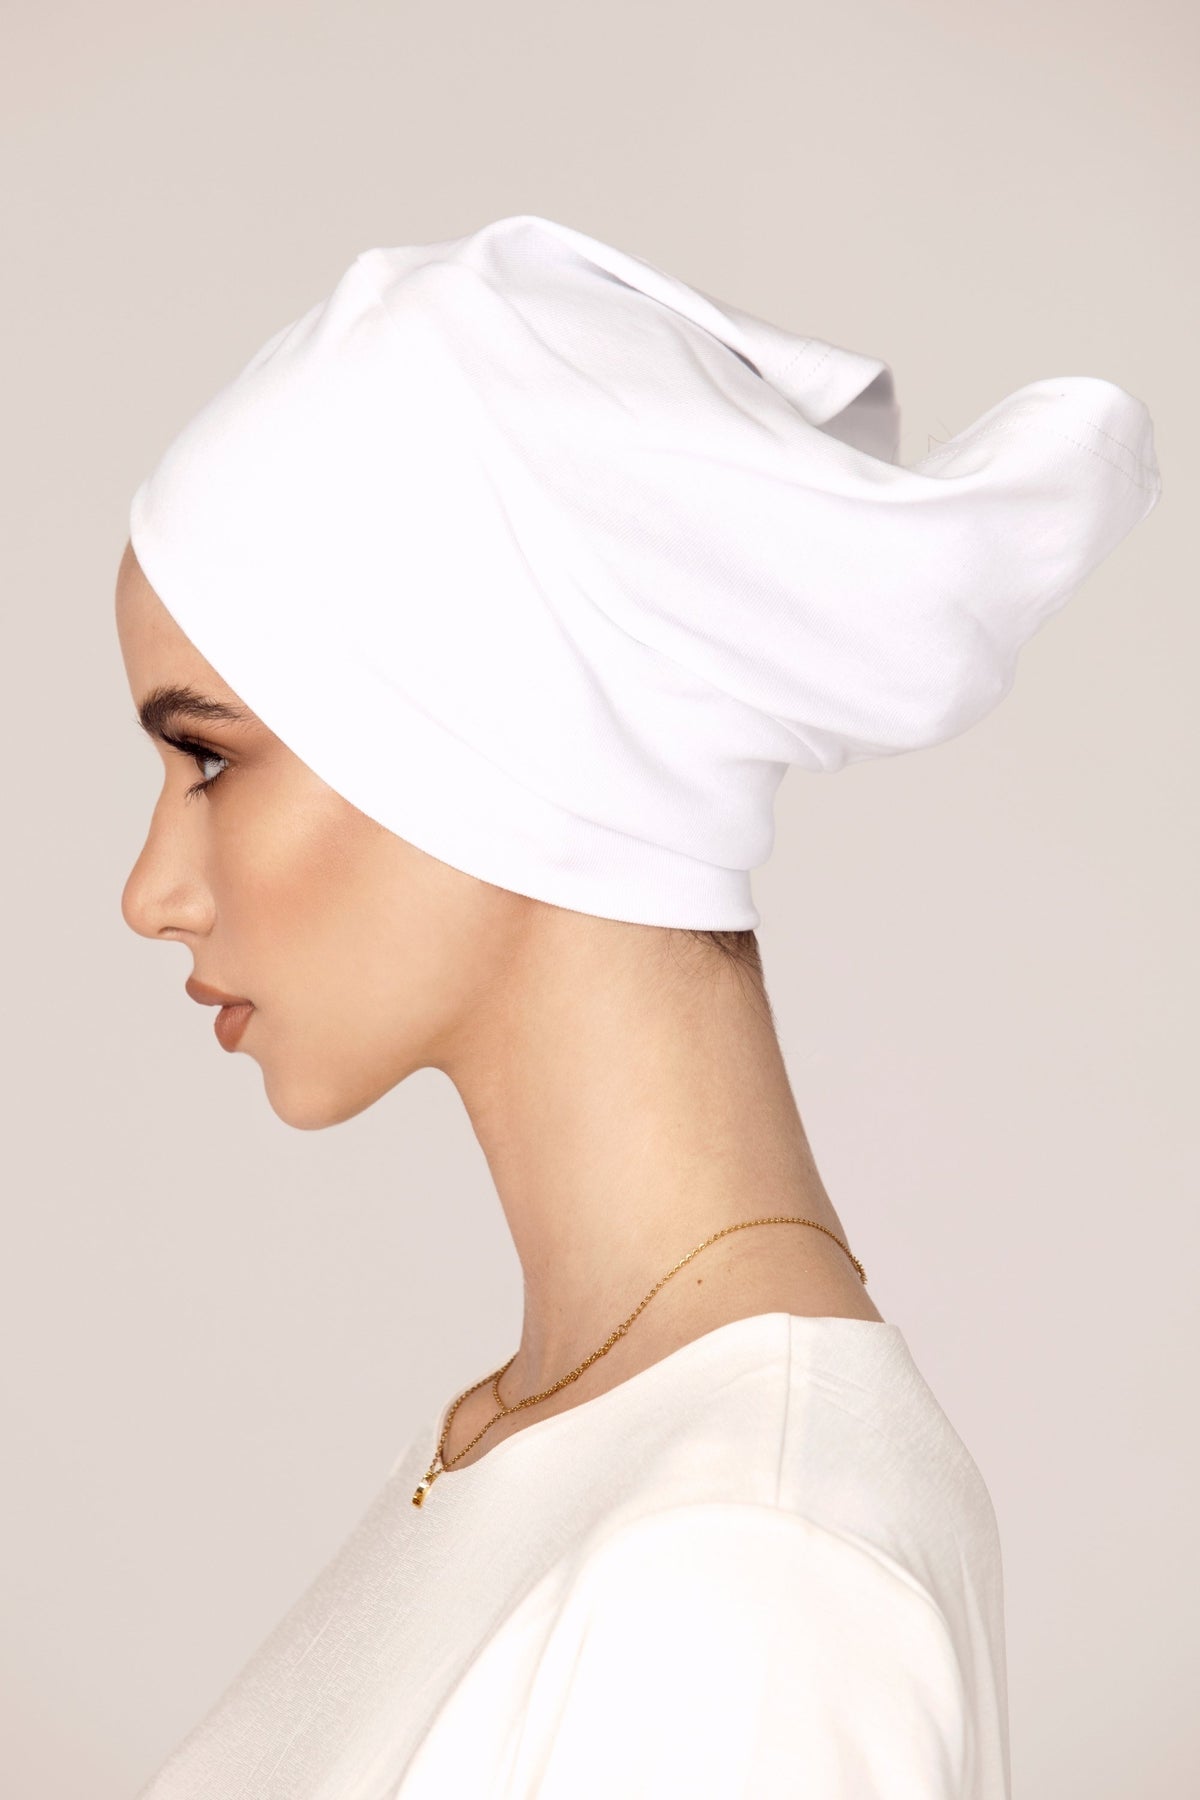 Undercaps Collections: Fashion Headwear by Vela